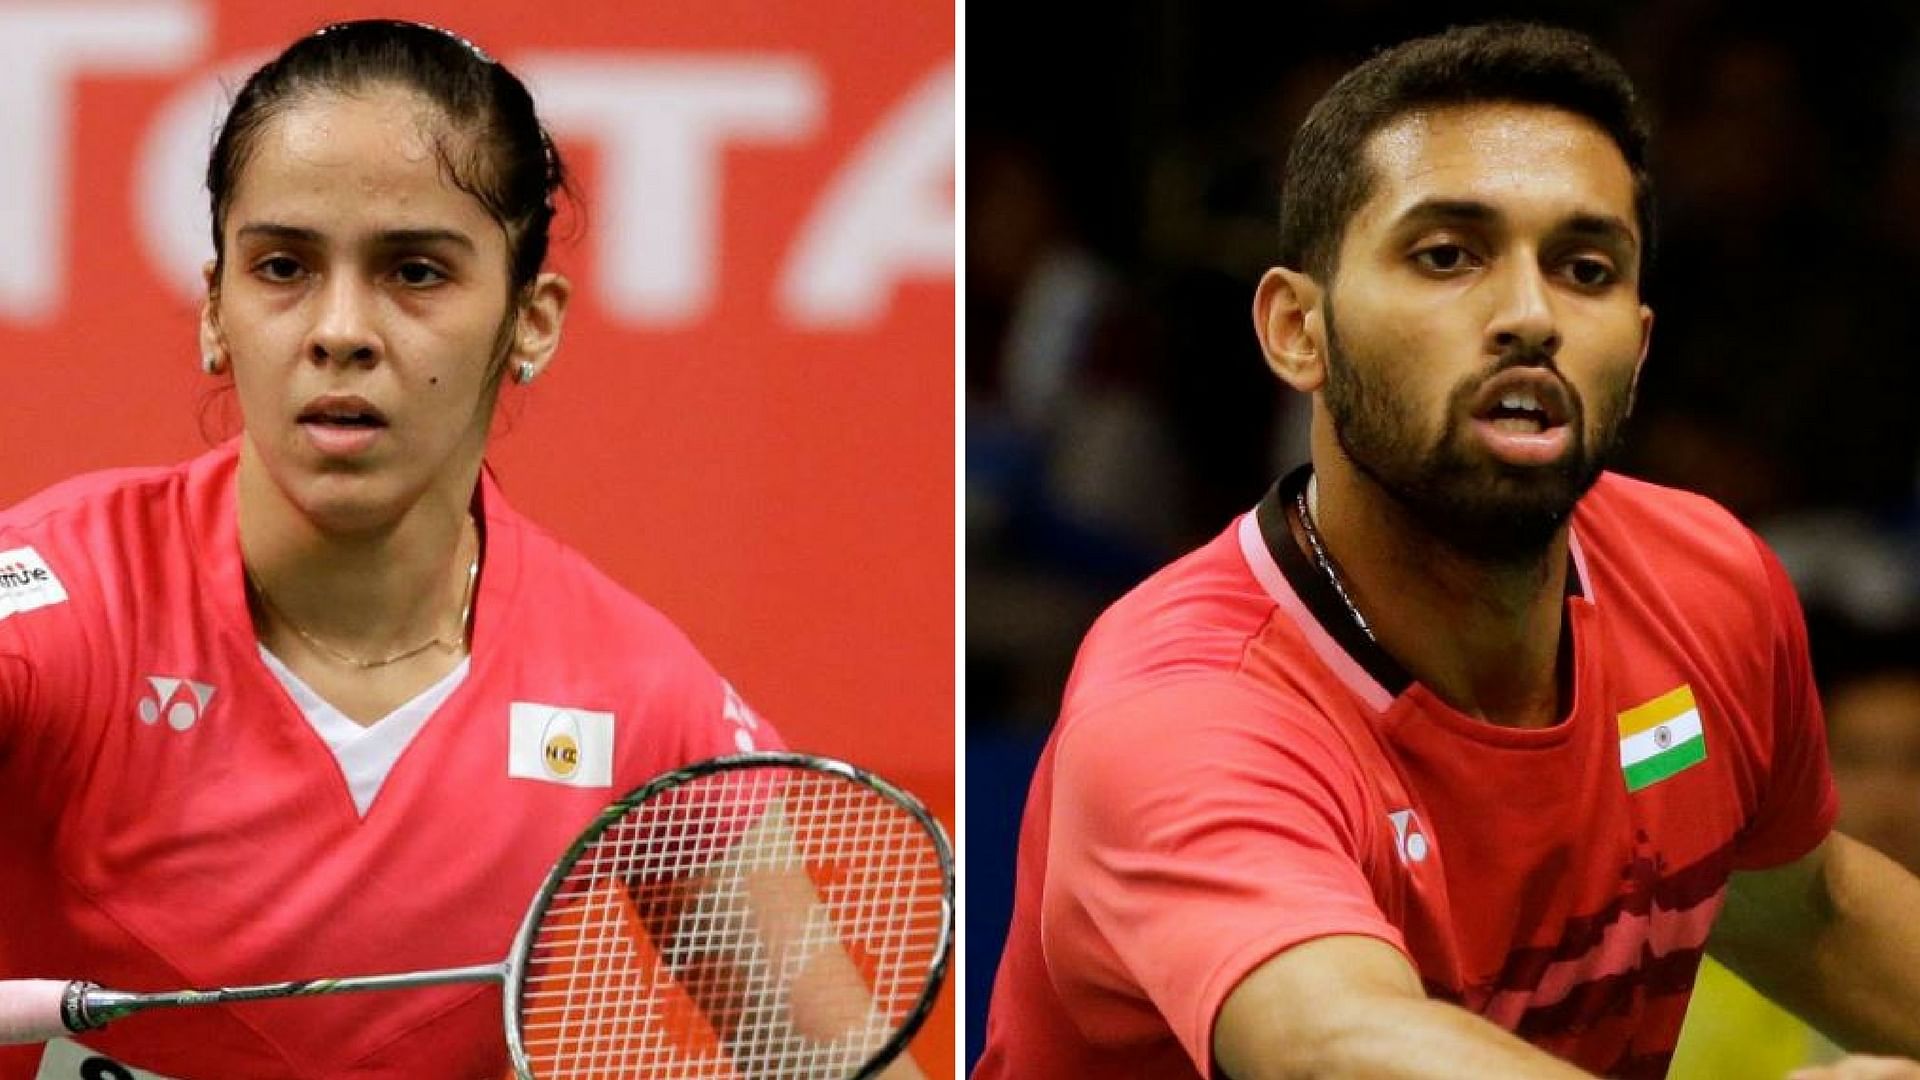 Saina Nehwal and H S Prannoy went down fighting in the women’s and men’s singles semifinals on Saturday, 27 April.